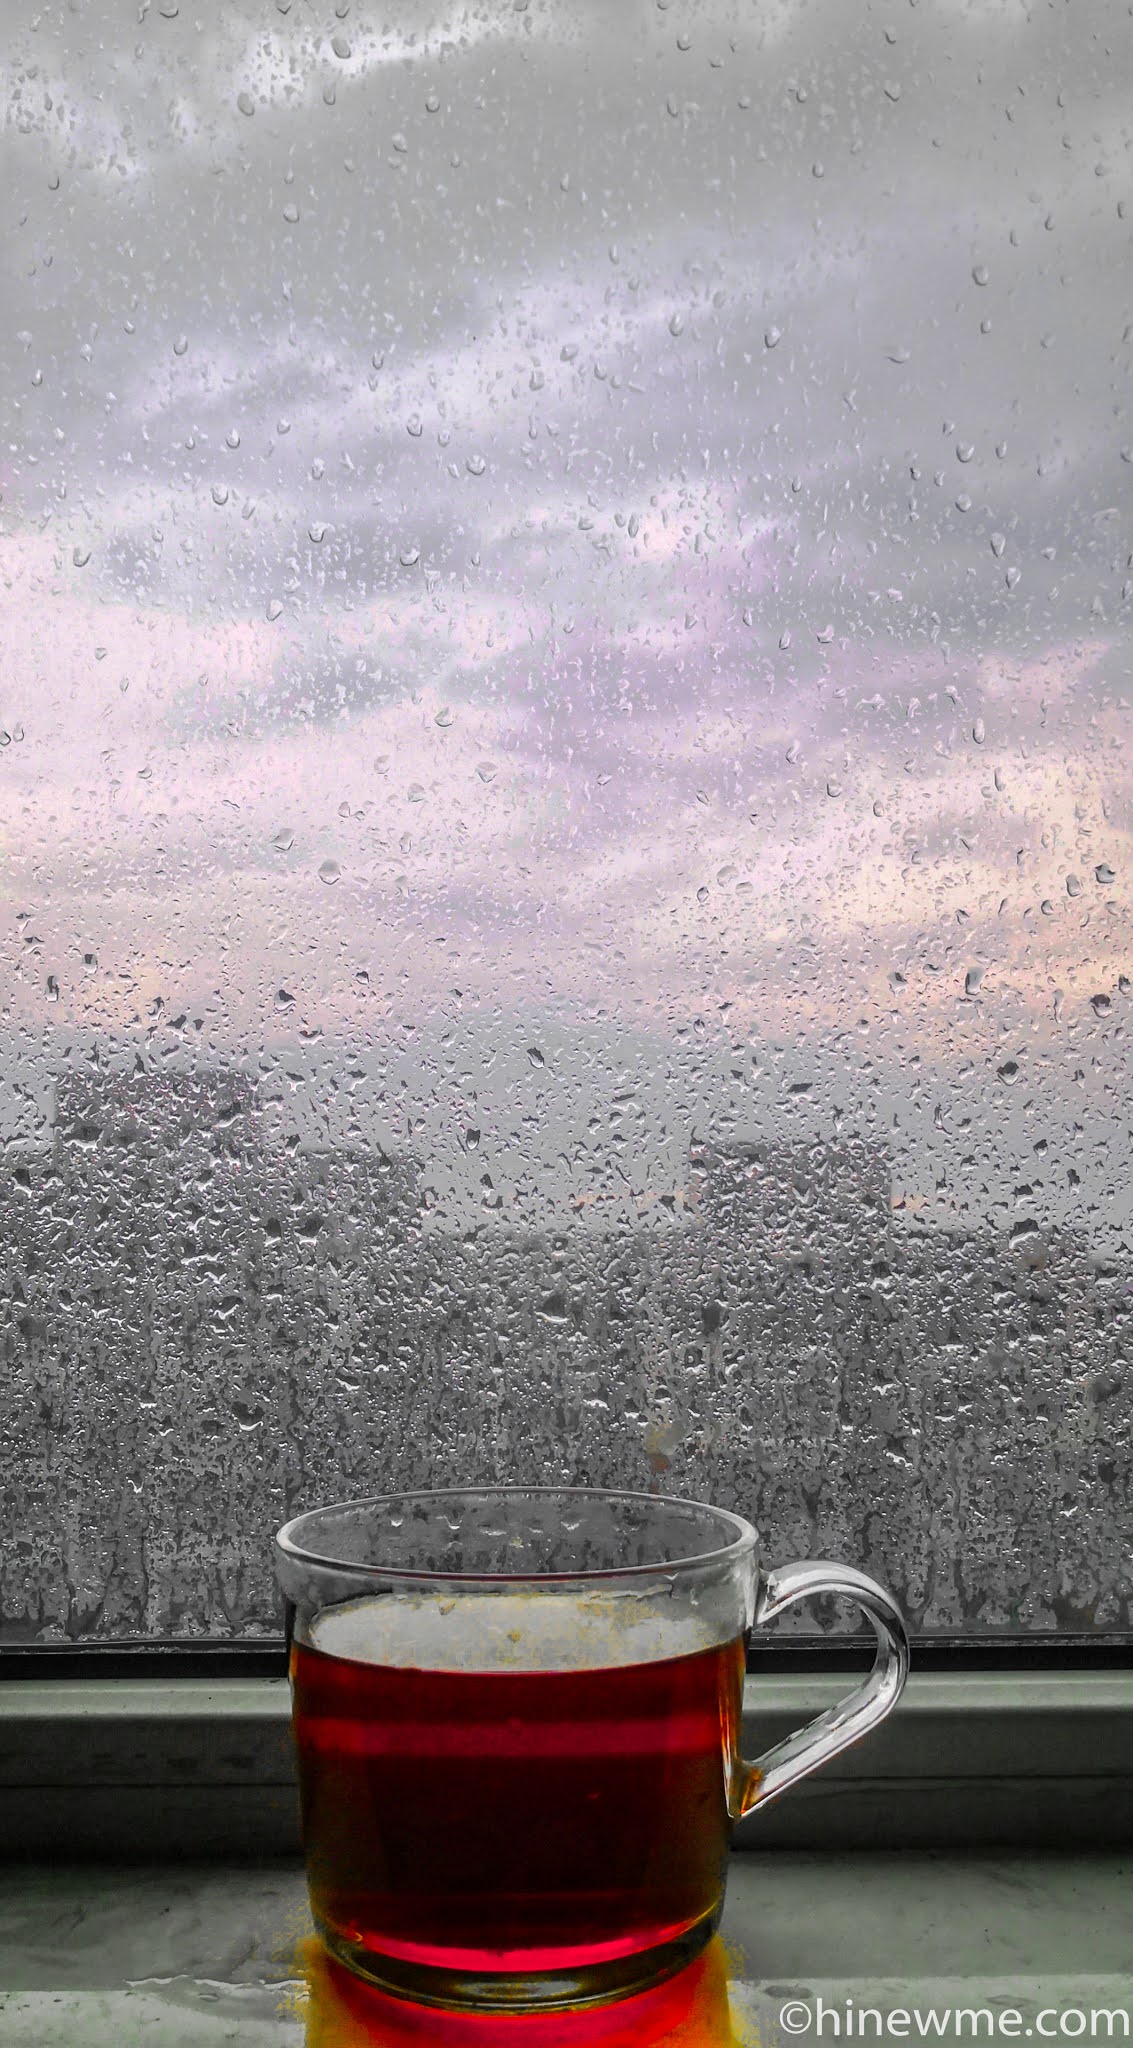 12 rain day and tea photography , come to see my photography